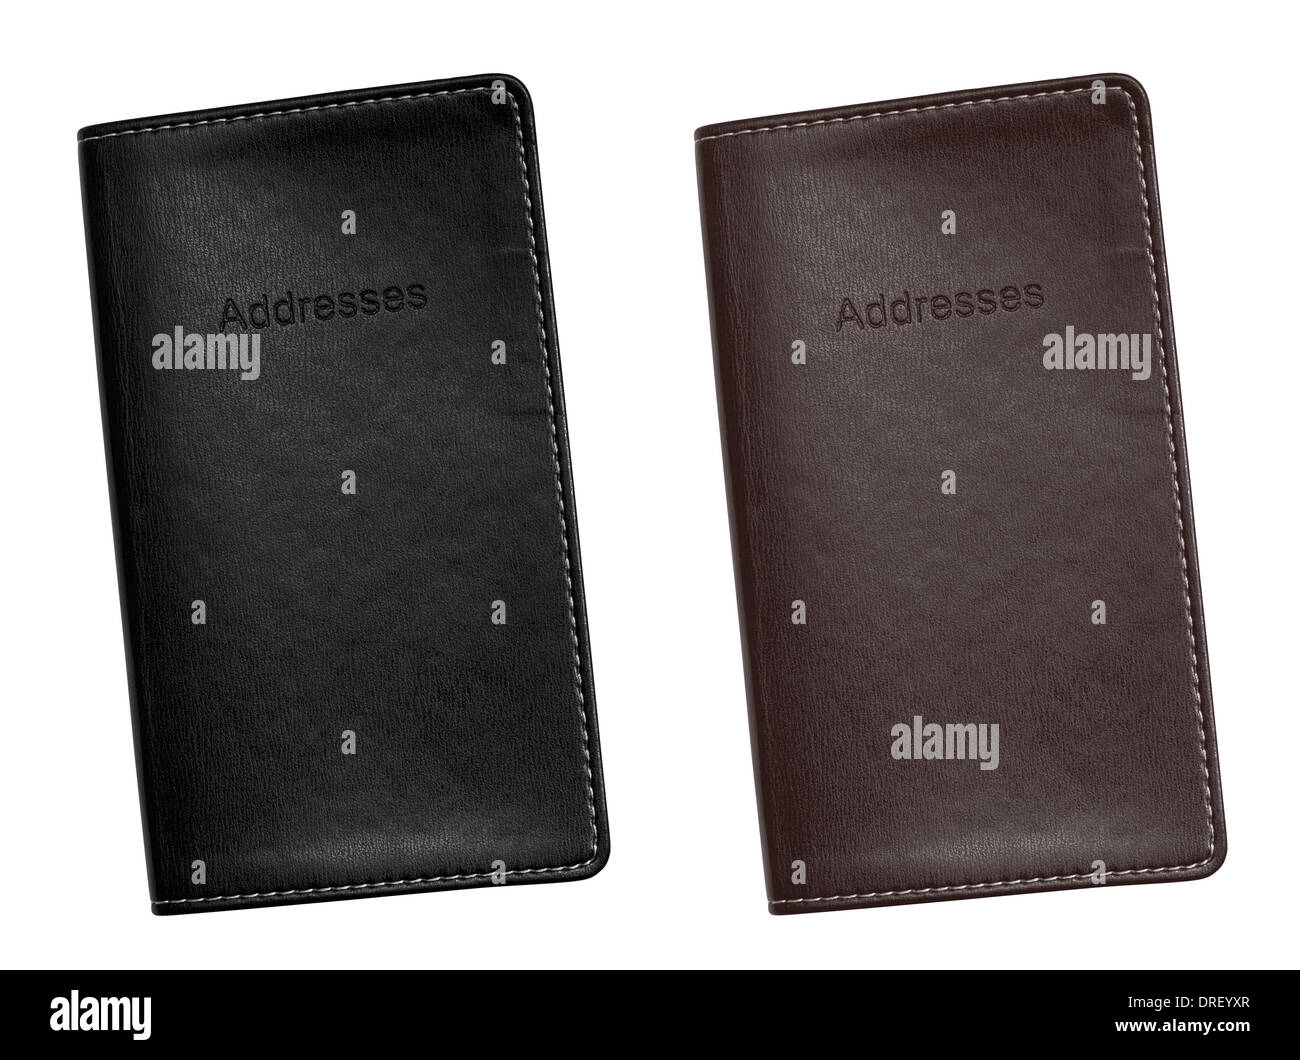 Pocket sized Leather bound address book for organising your personal contacts, emails and addresses. Stock Photo